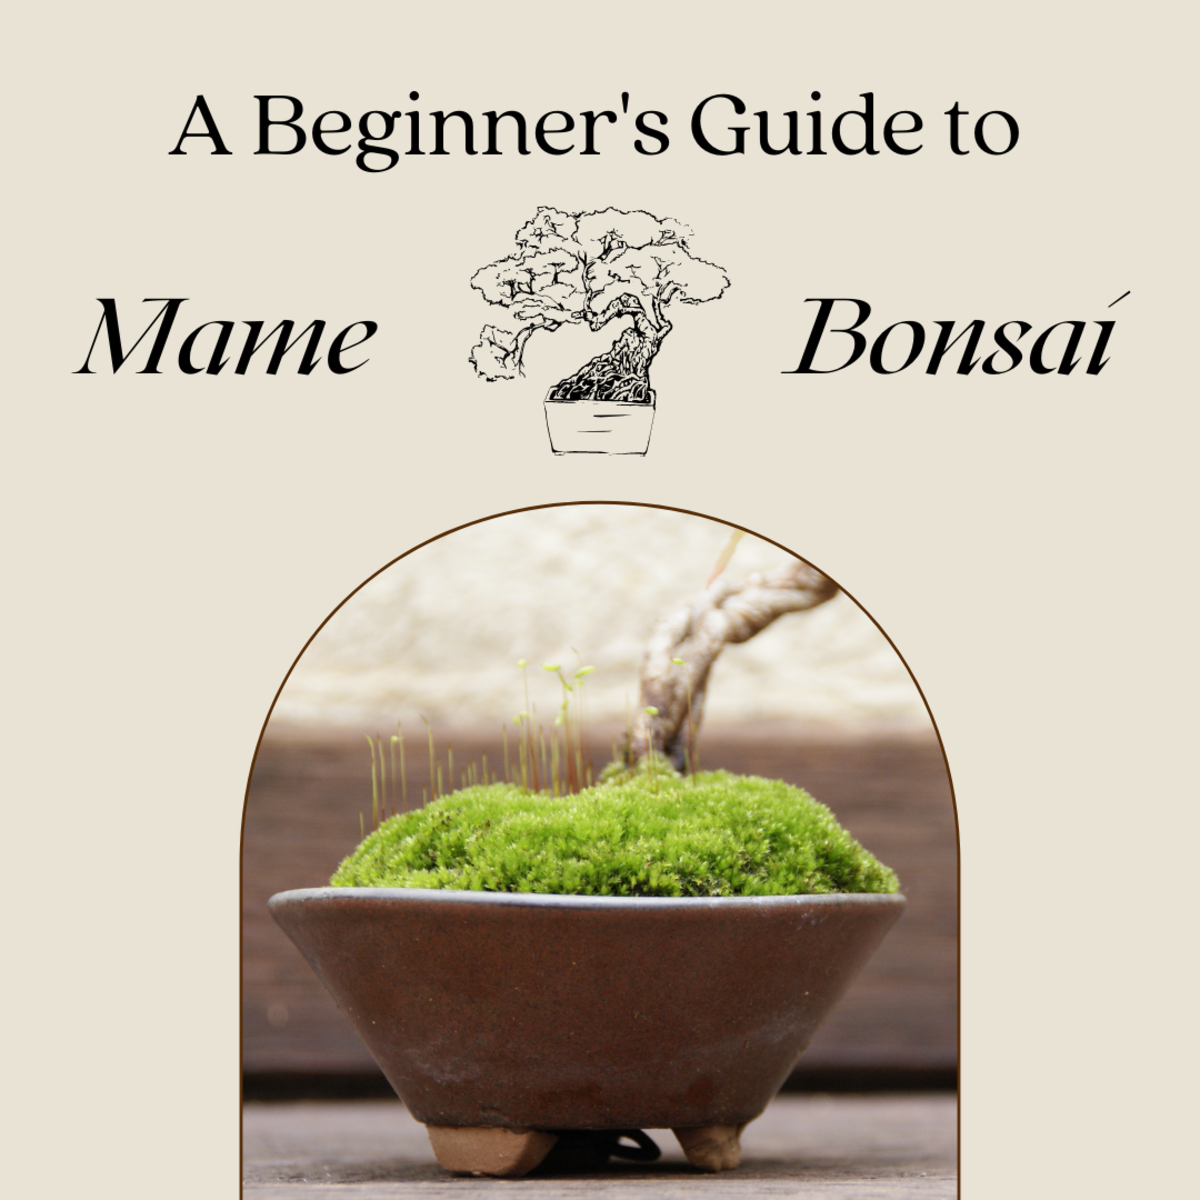 This guide will provide you with information for getting your first mame bonsai (miniature bonsai) started and help you keep it going healthy and strong.